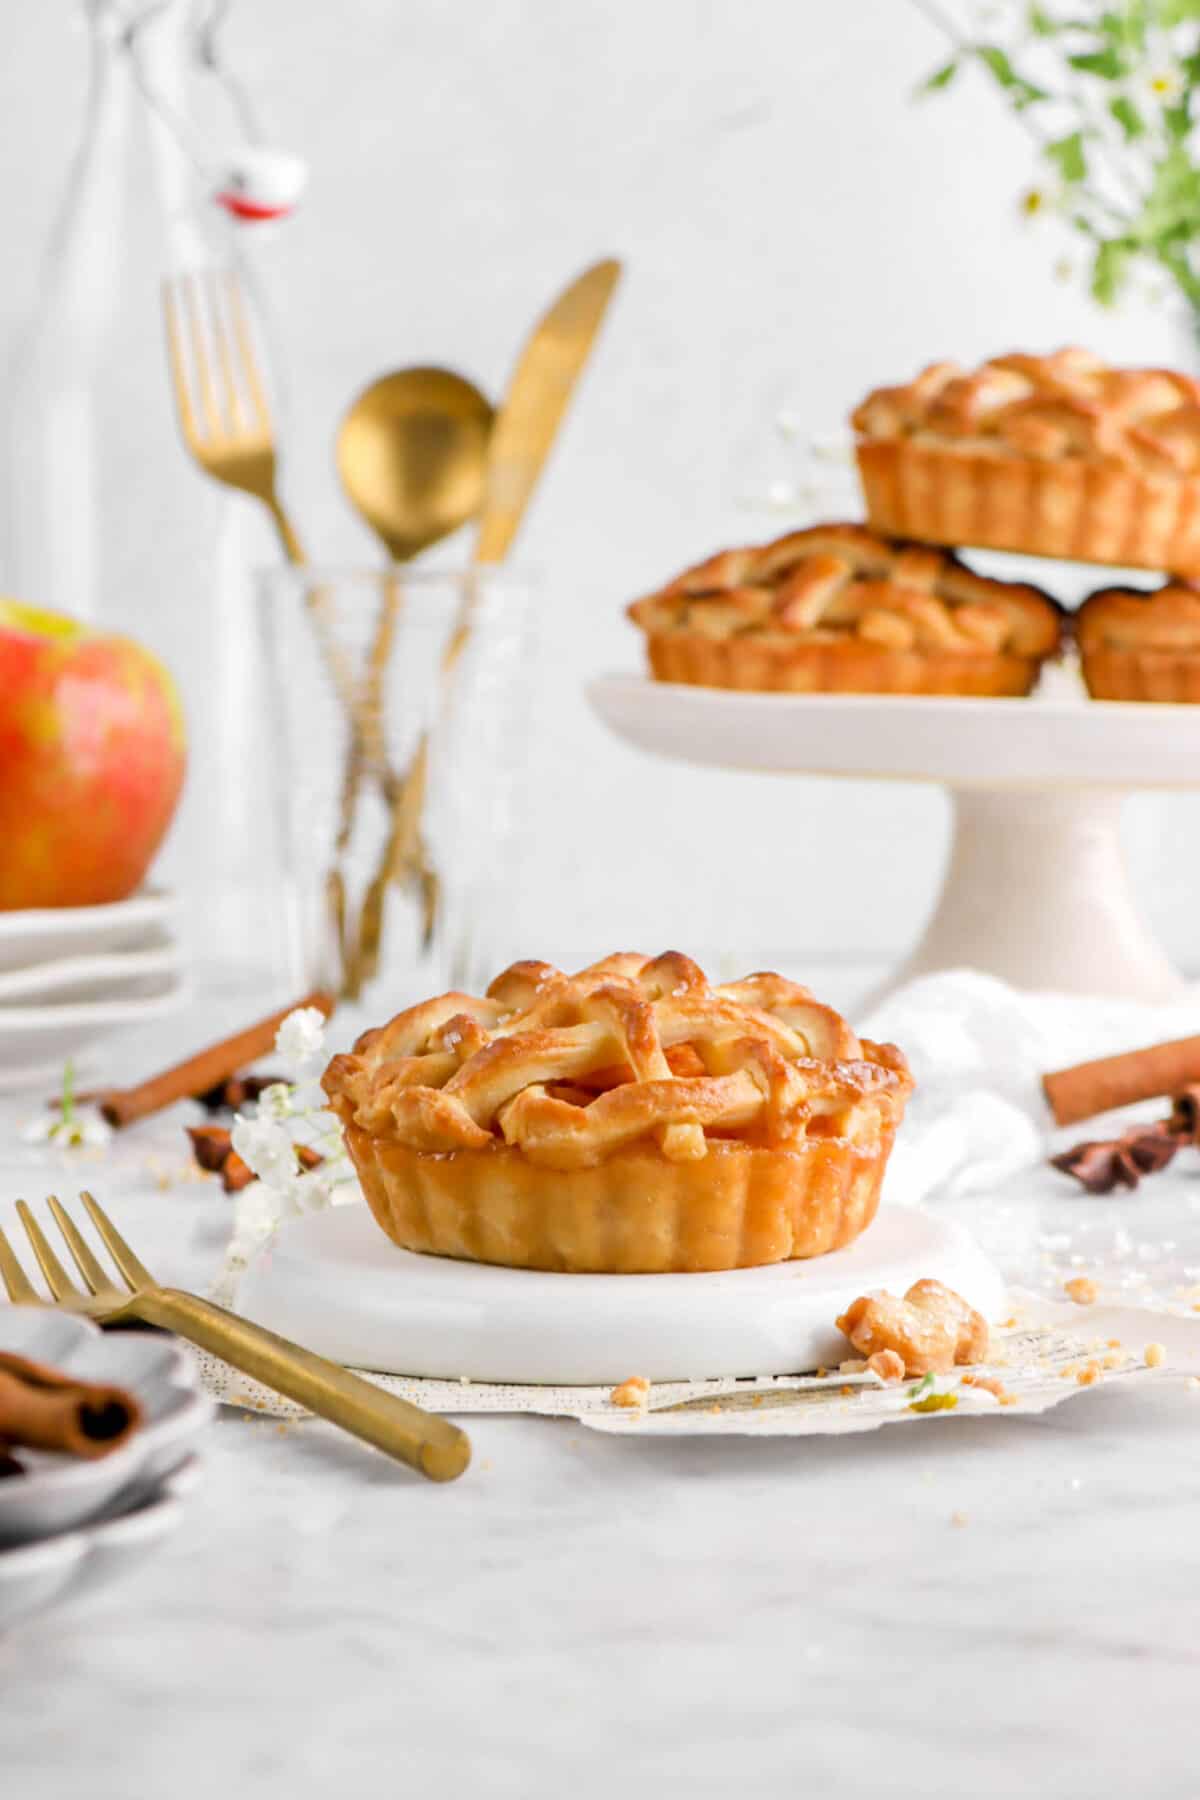 mini apple pie on upside down white plate with three pies behind, gold utensils, and an apple on stacked plates